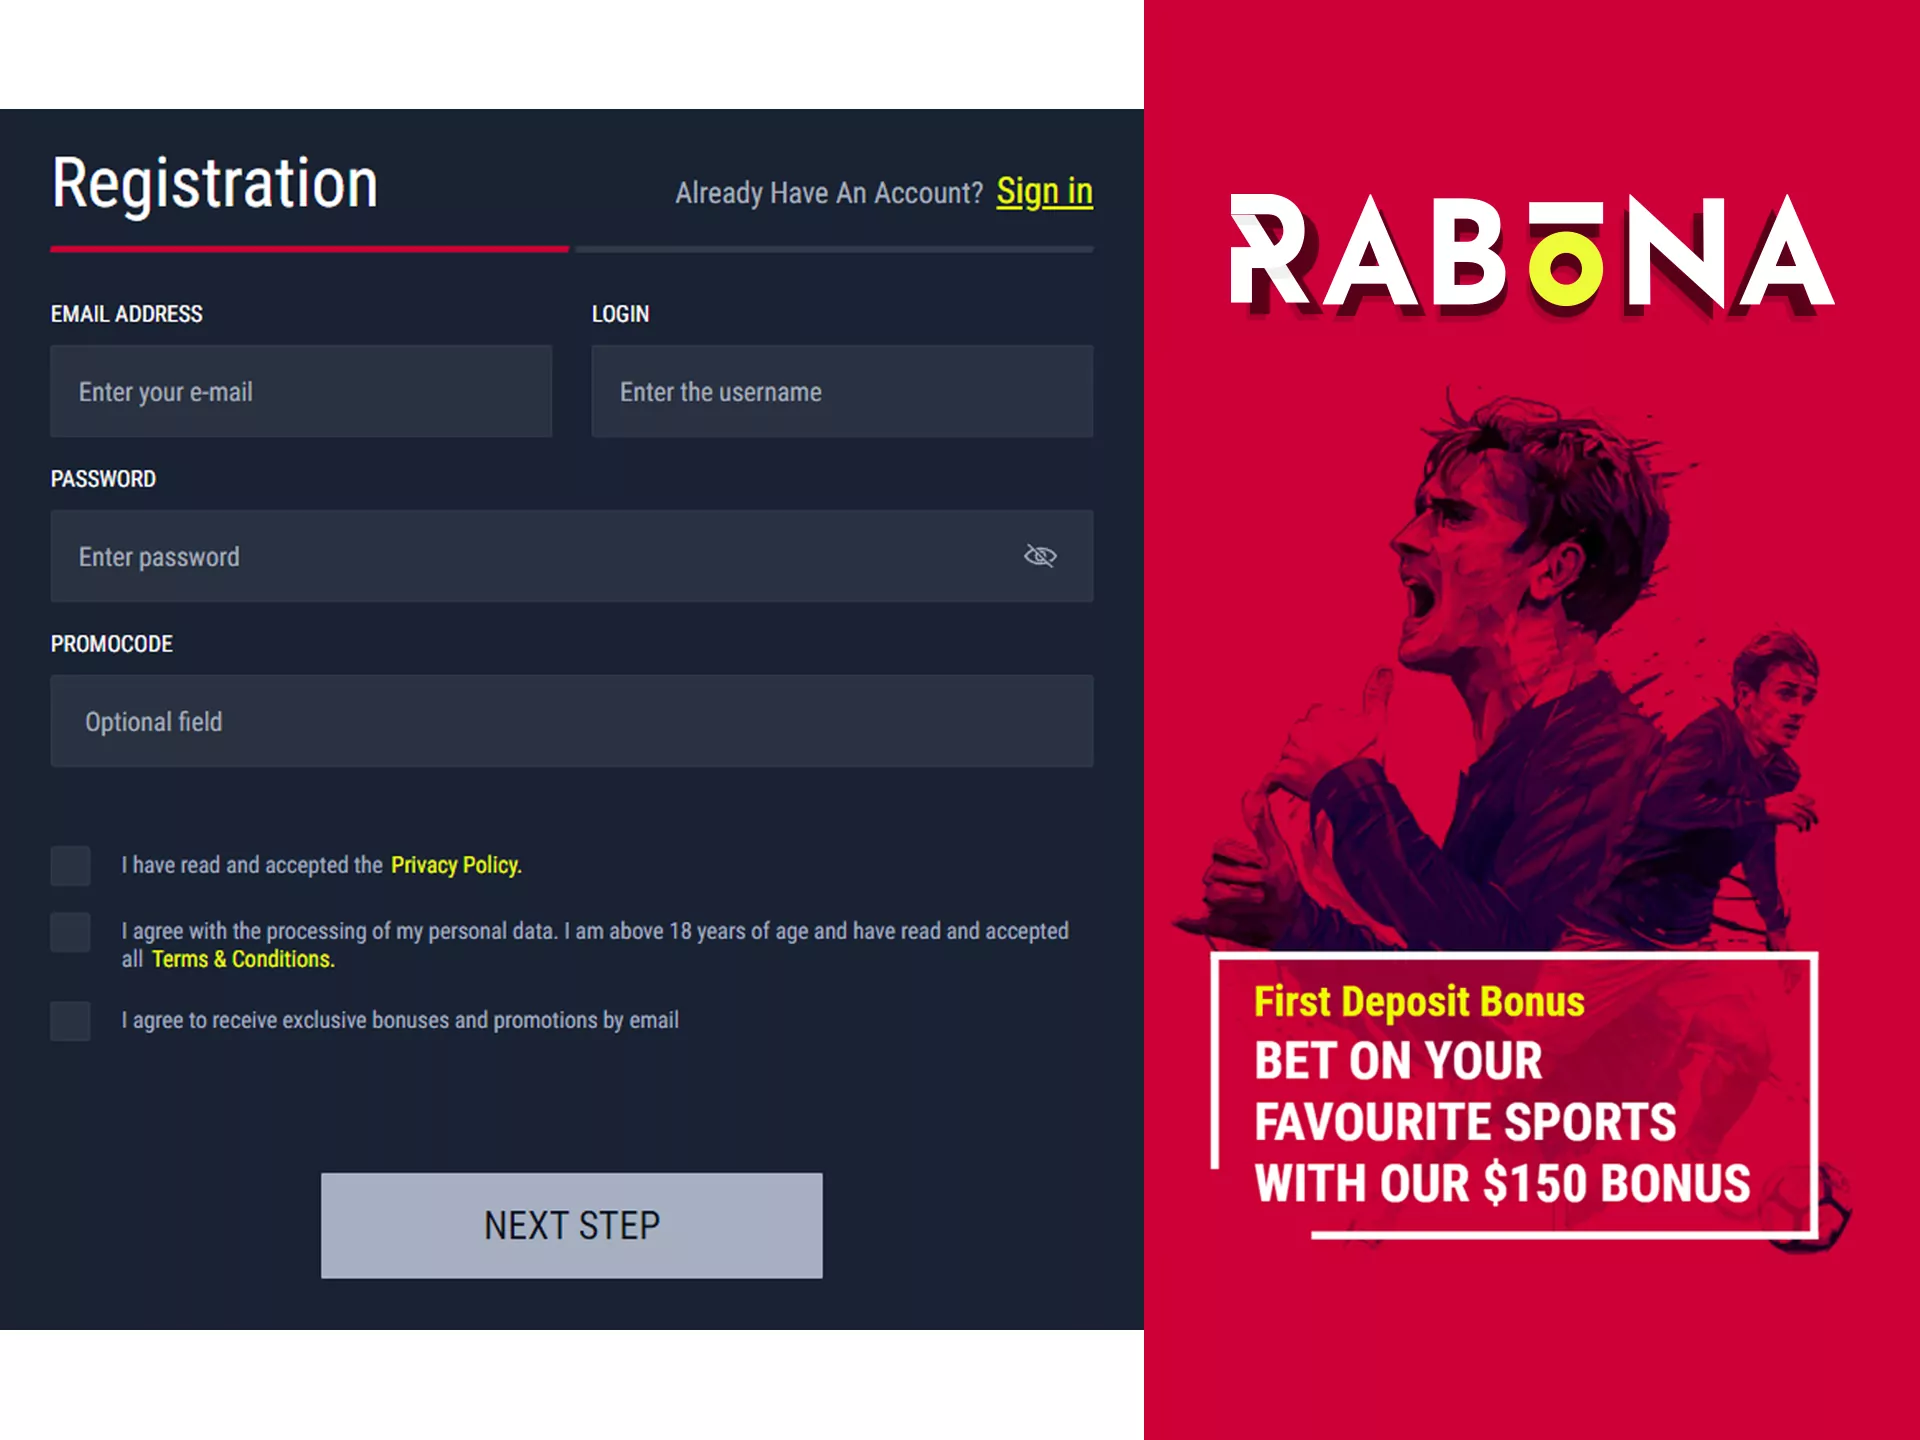 Registrate and start betting at Rabona.